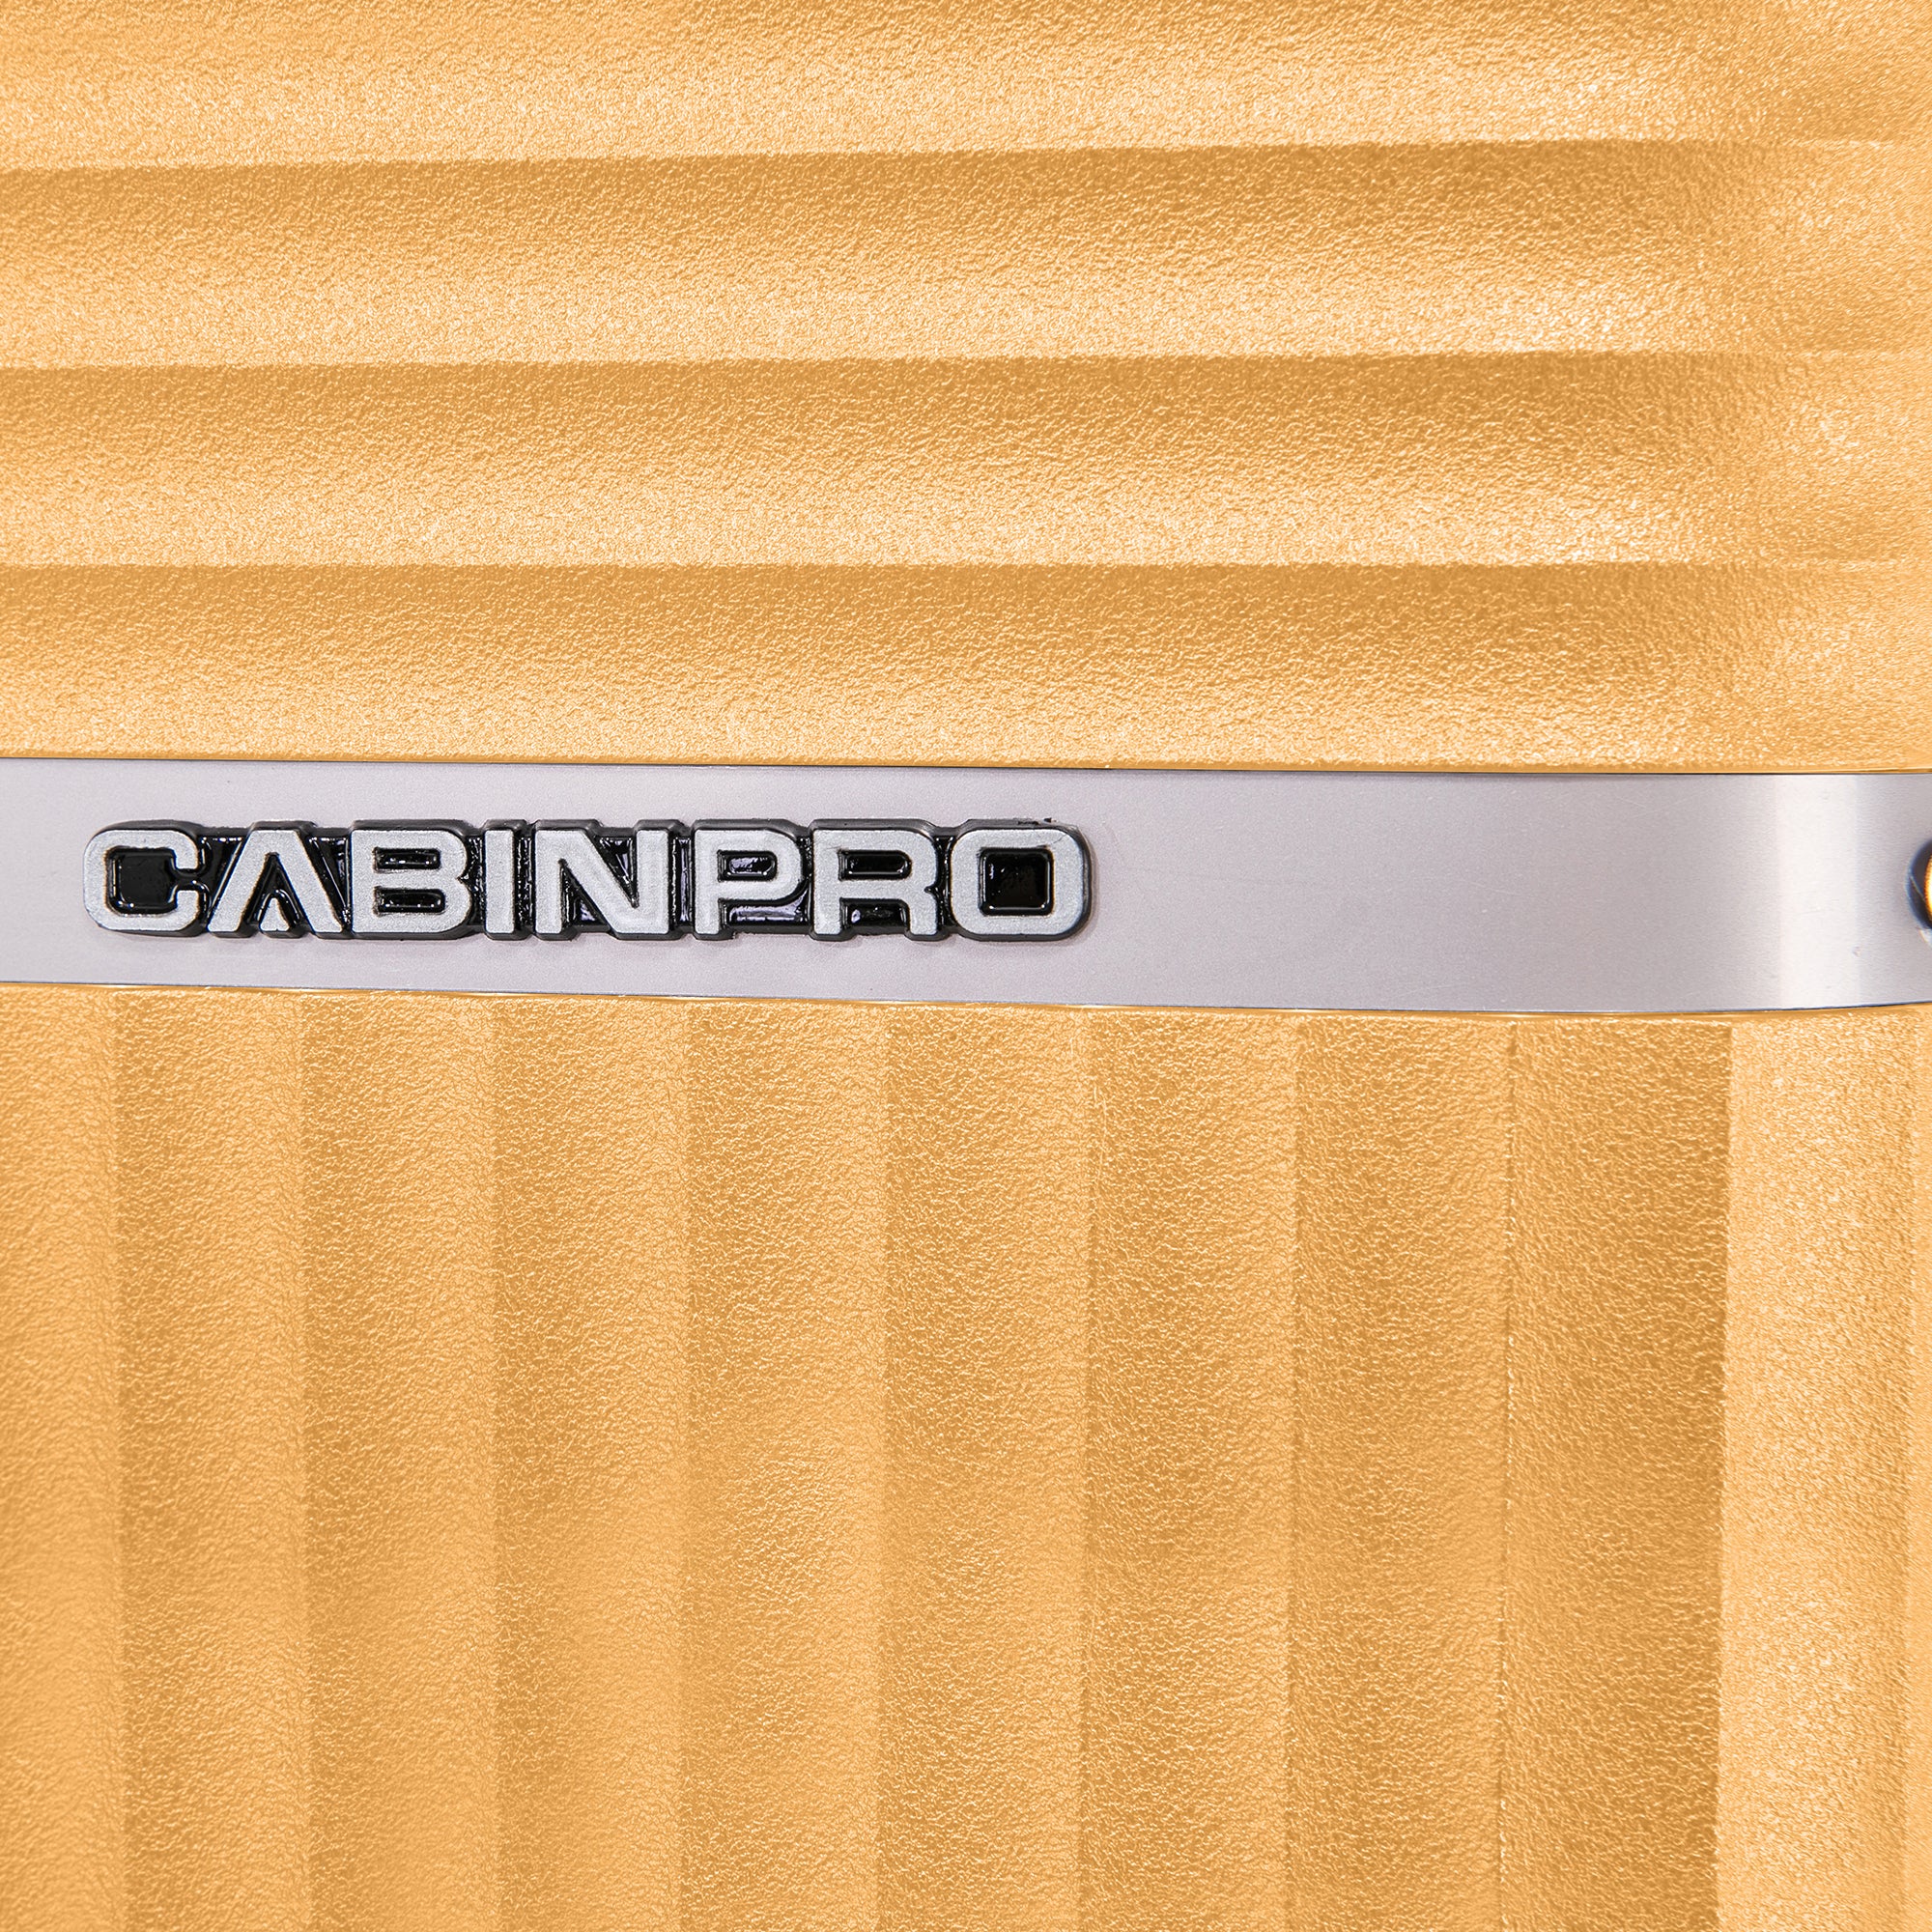 Cabin luggage #Color_Yellow